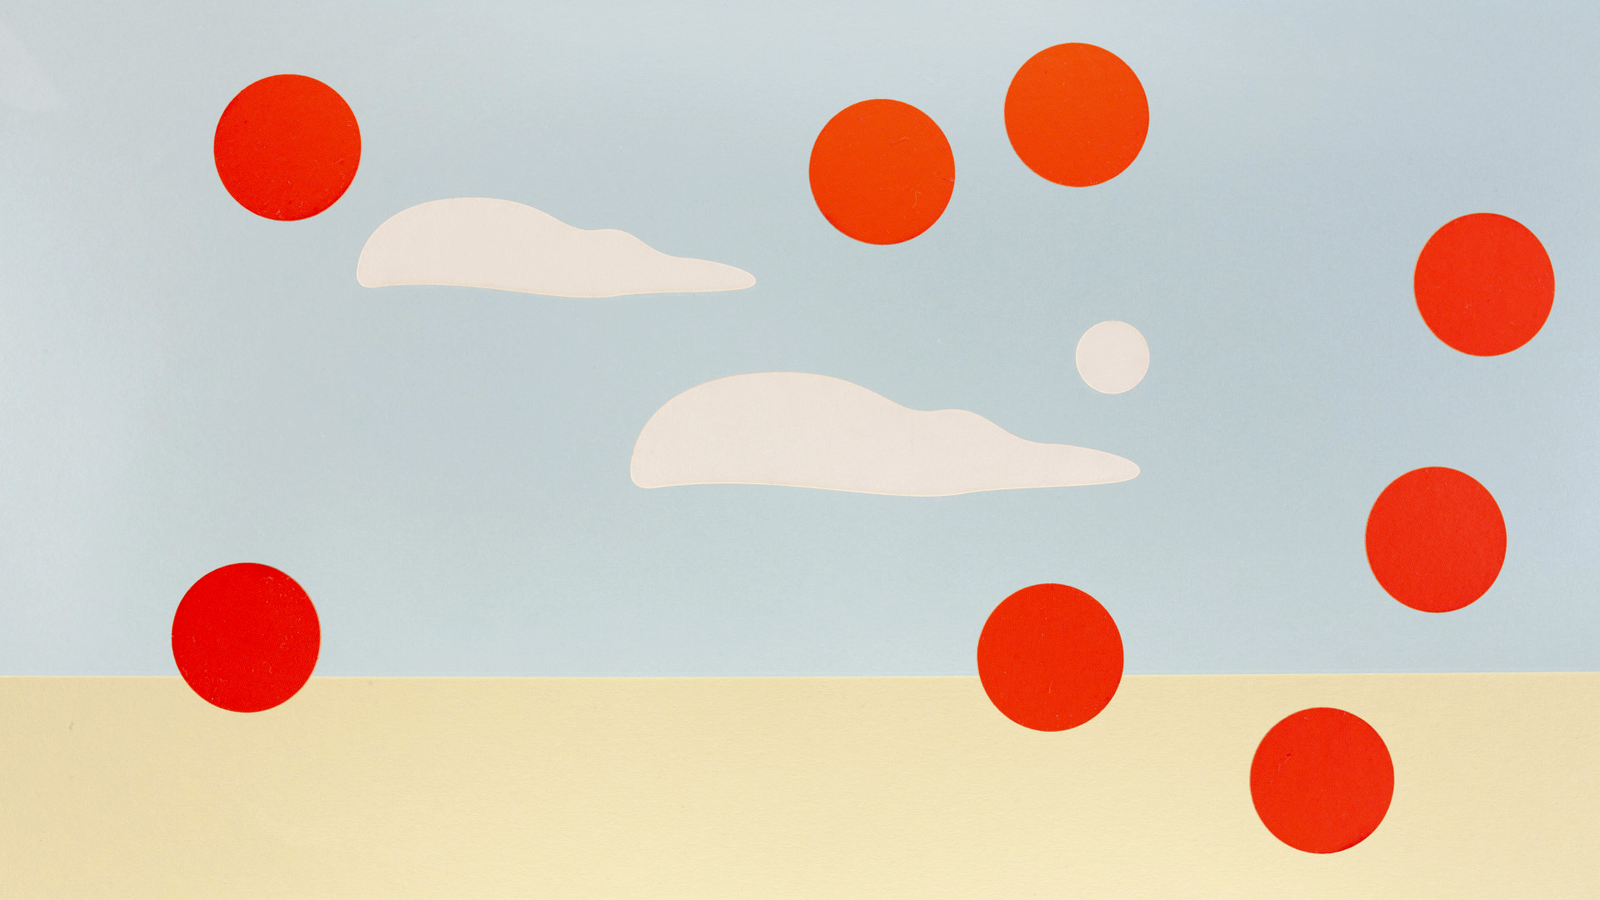 Paper landscape with ground, sky and clouds. 8 red dots arranged as overlay.